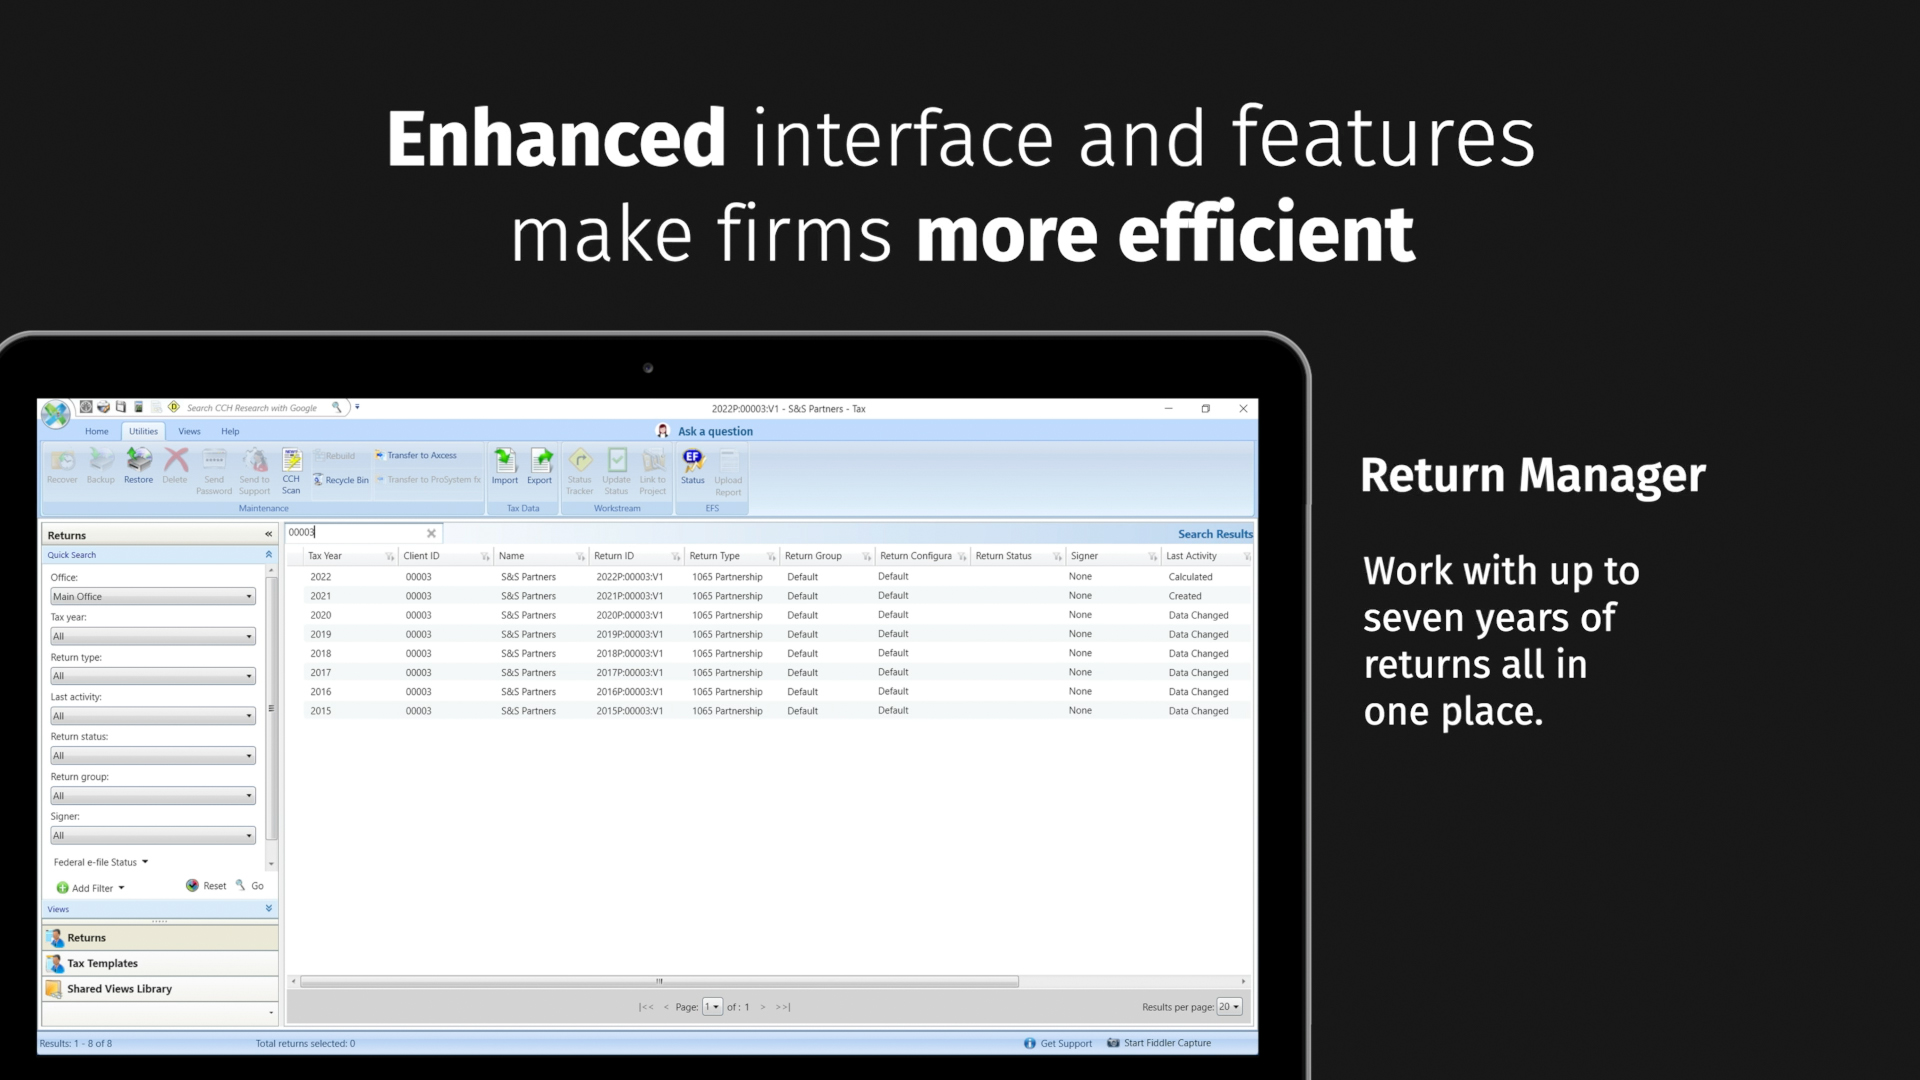 Screenshot of the CCH Axcess Return Manager. The heading says "Enhanced interface and features make firms more efficient"